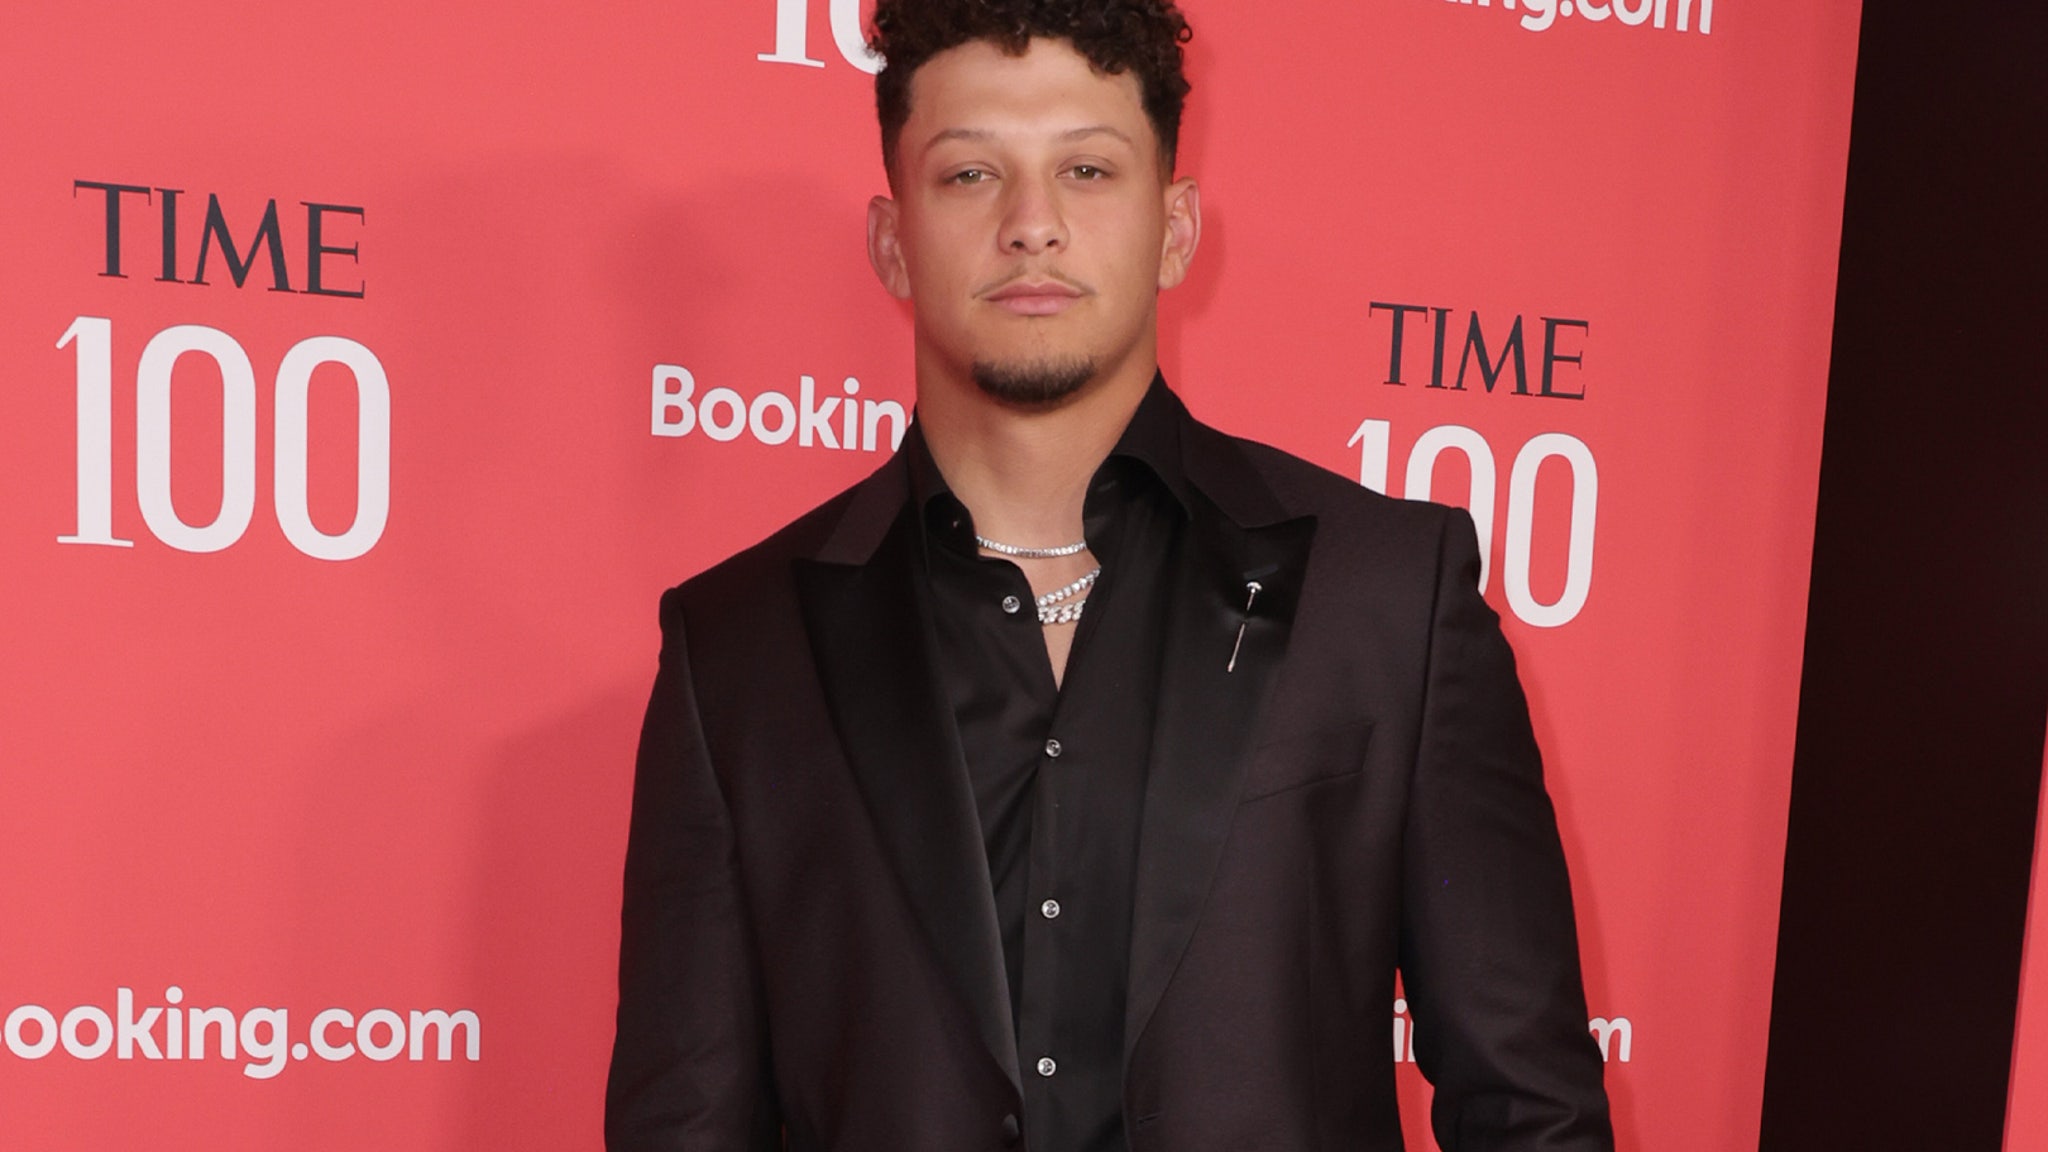 Patrick Mahomes Addresses Body-Shaming Comments: 'I Don't Have Abs'